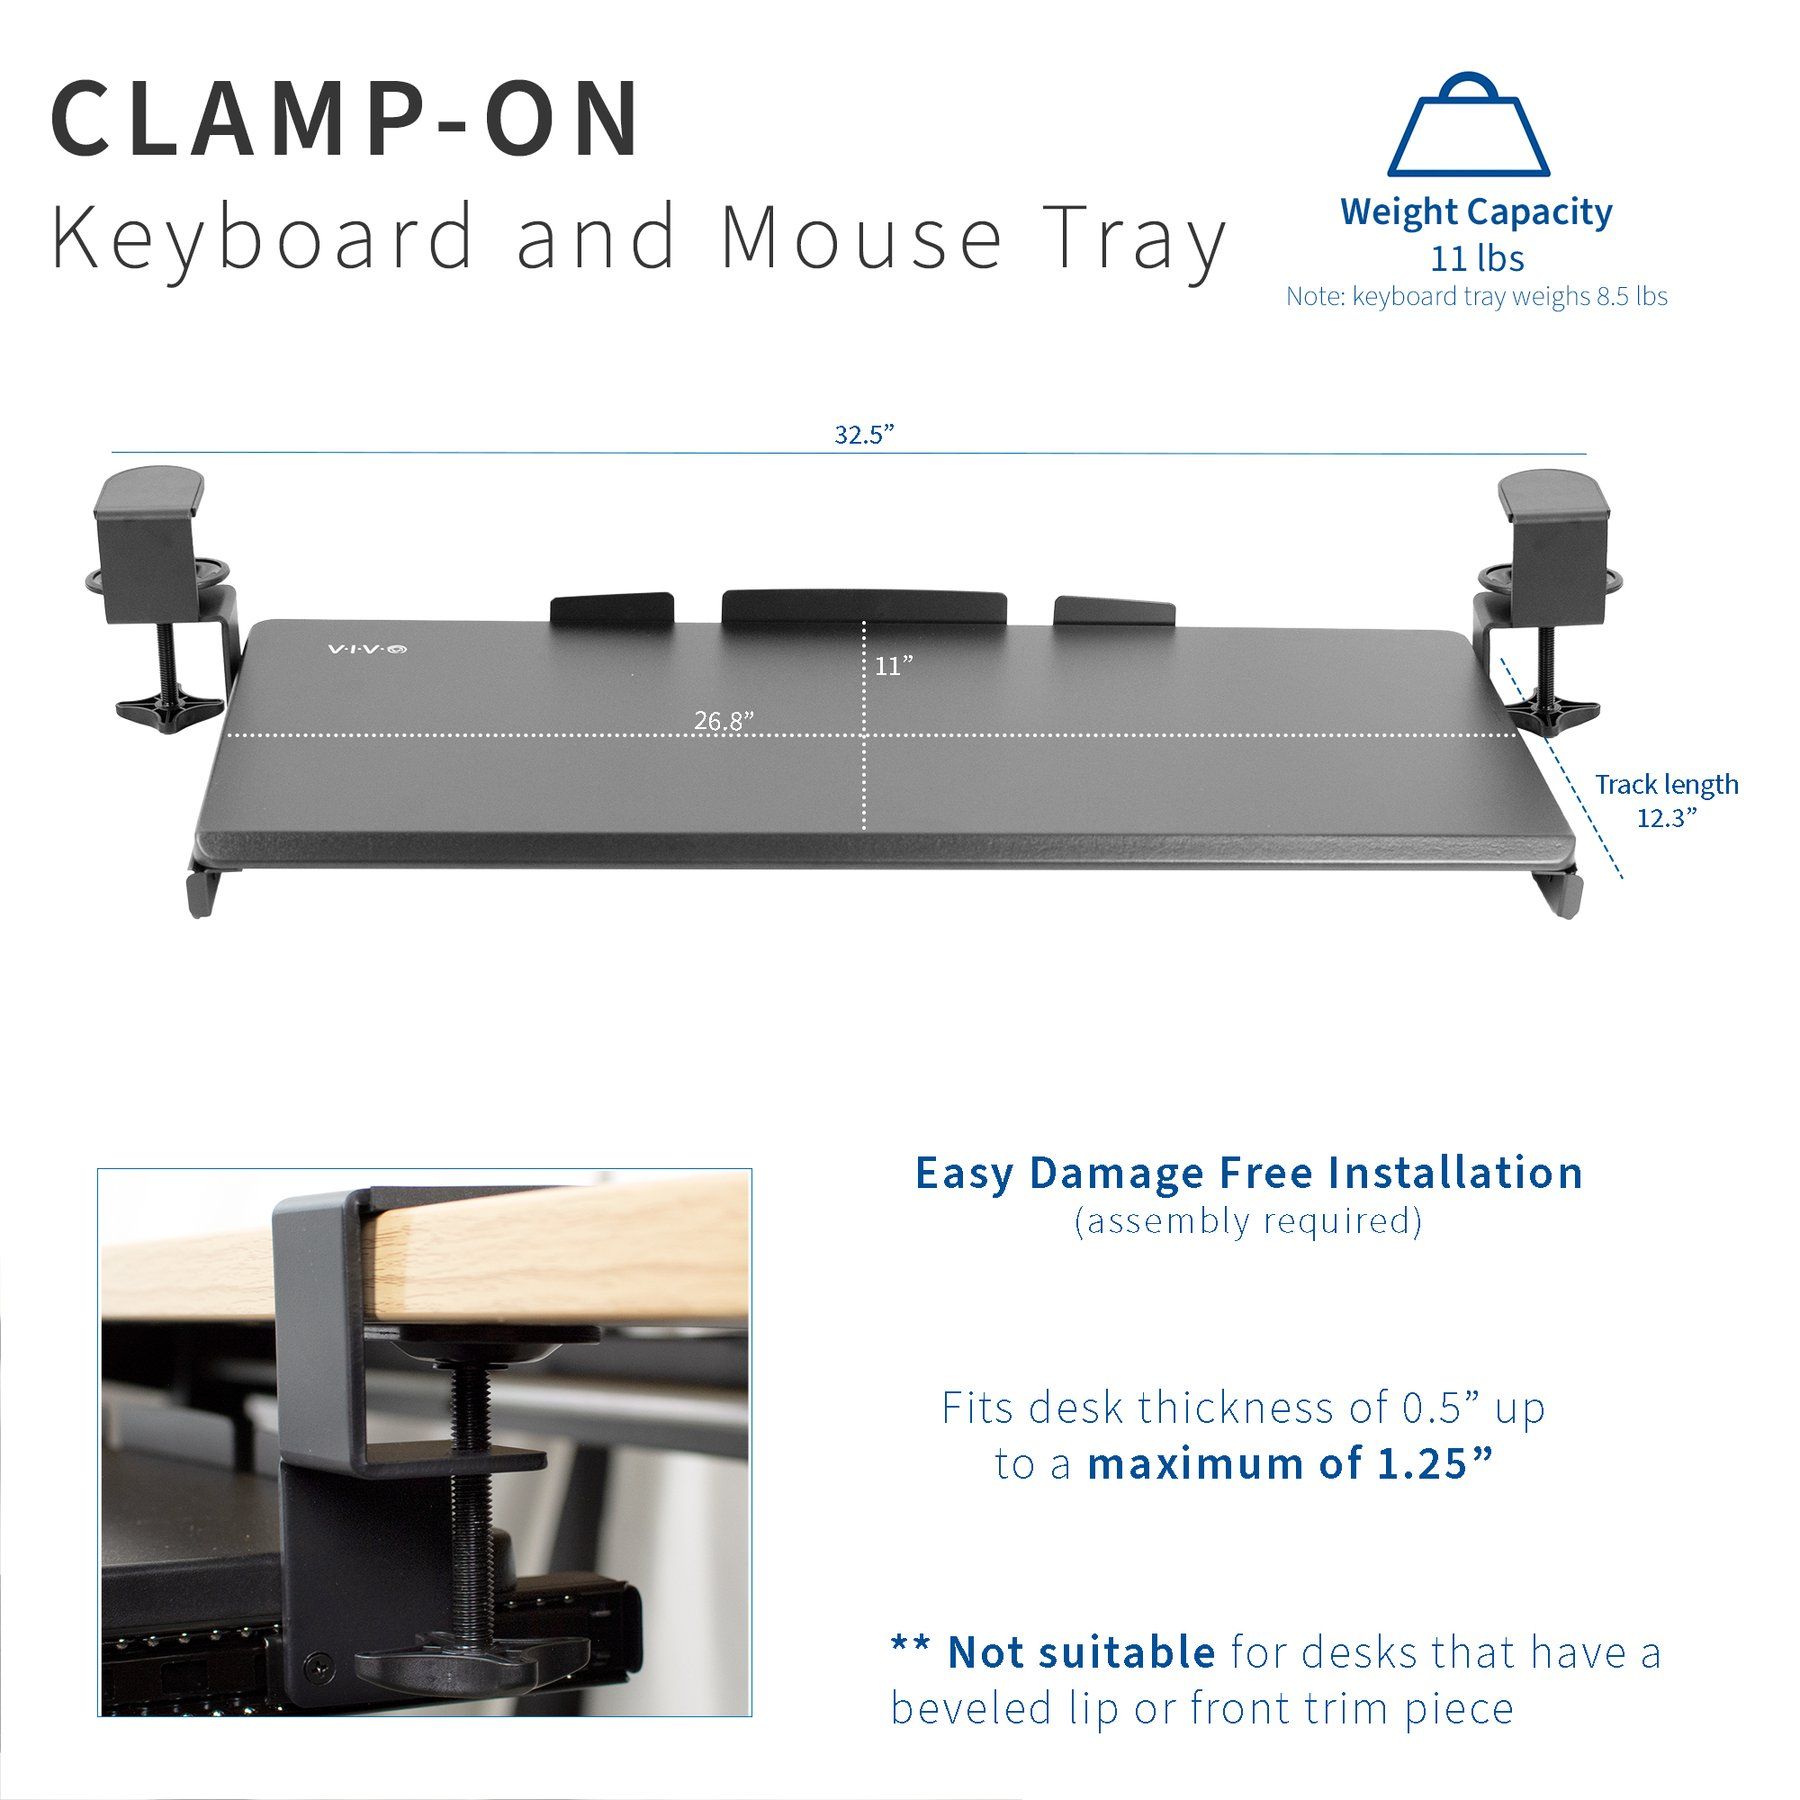 VIVO Clamp-on Keyboard Tray size